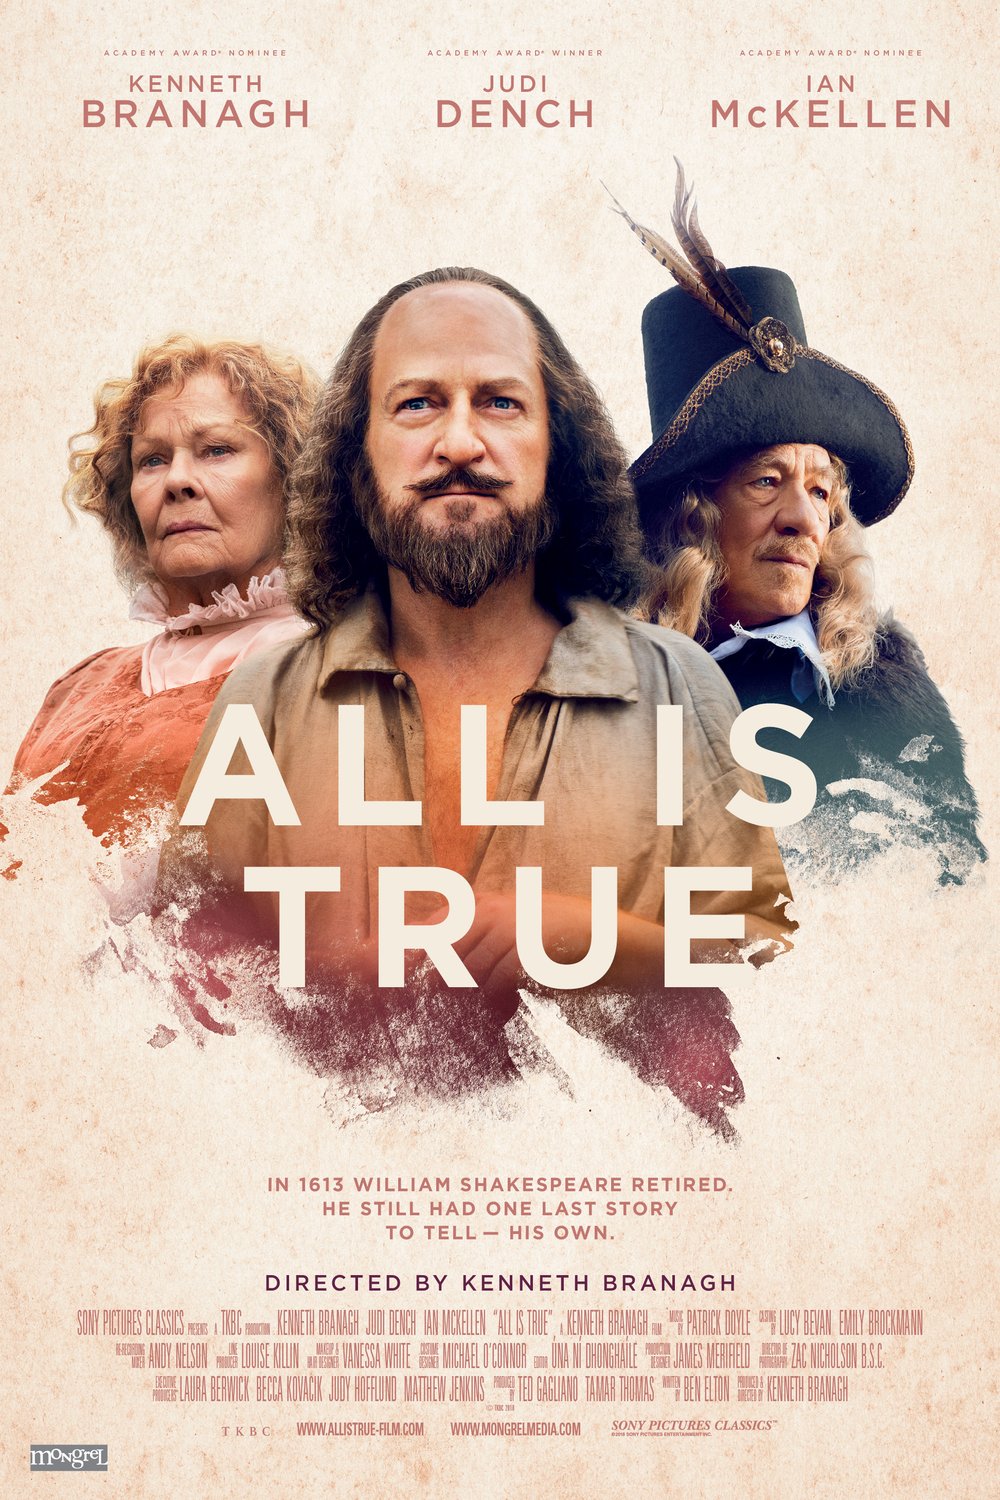 Poster of the movie All Is True